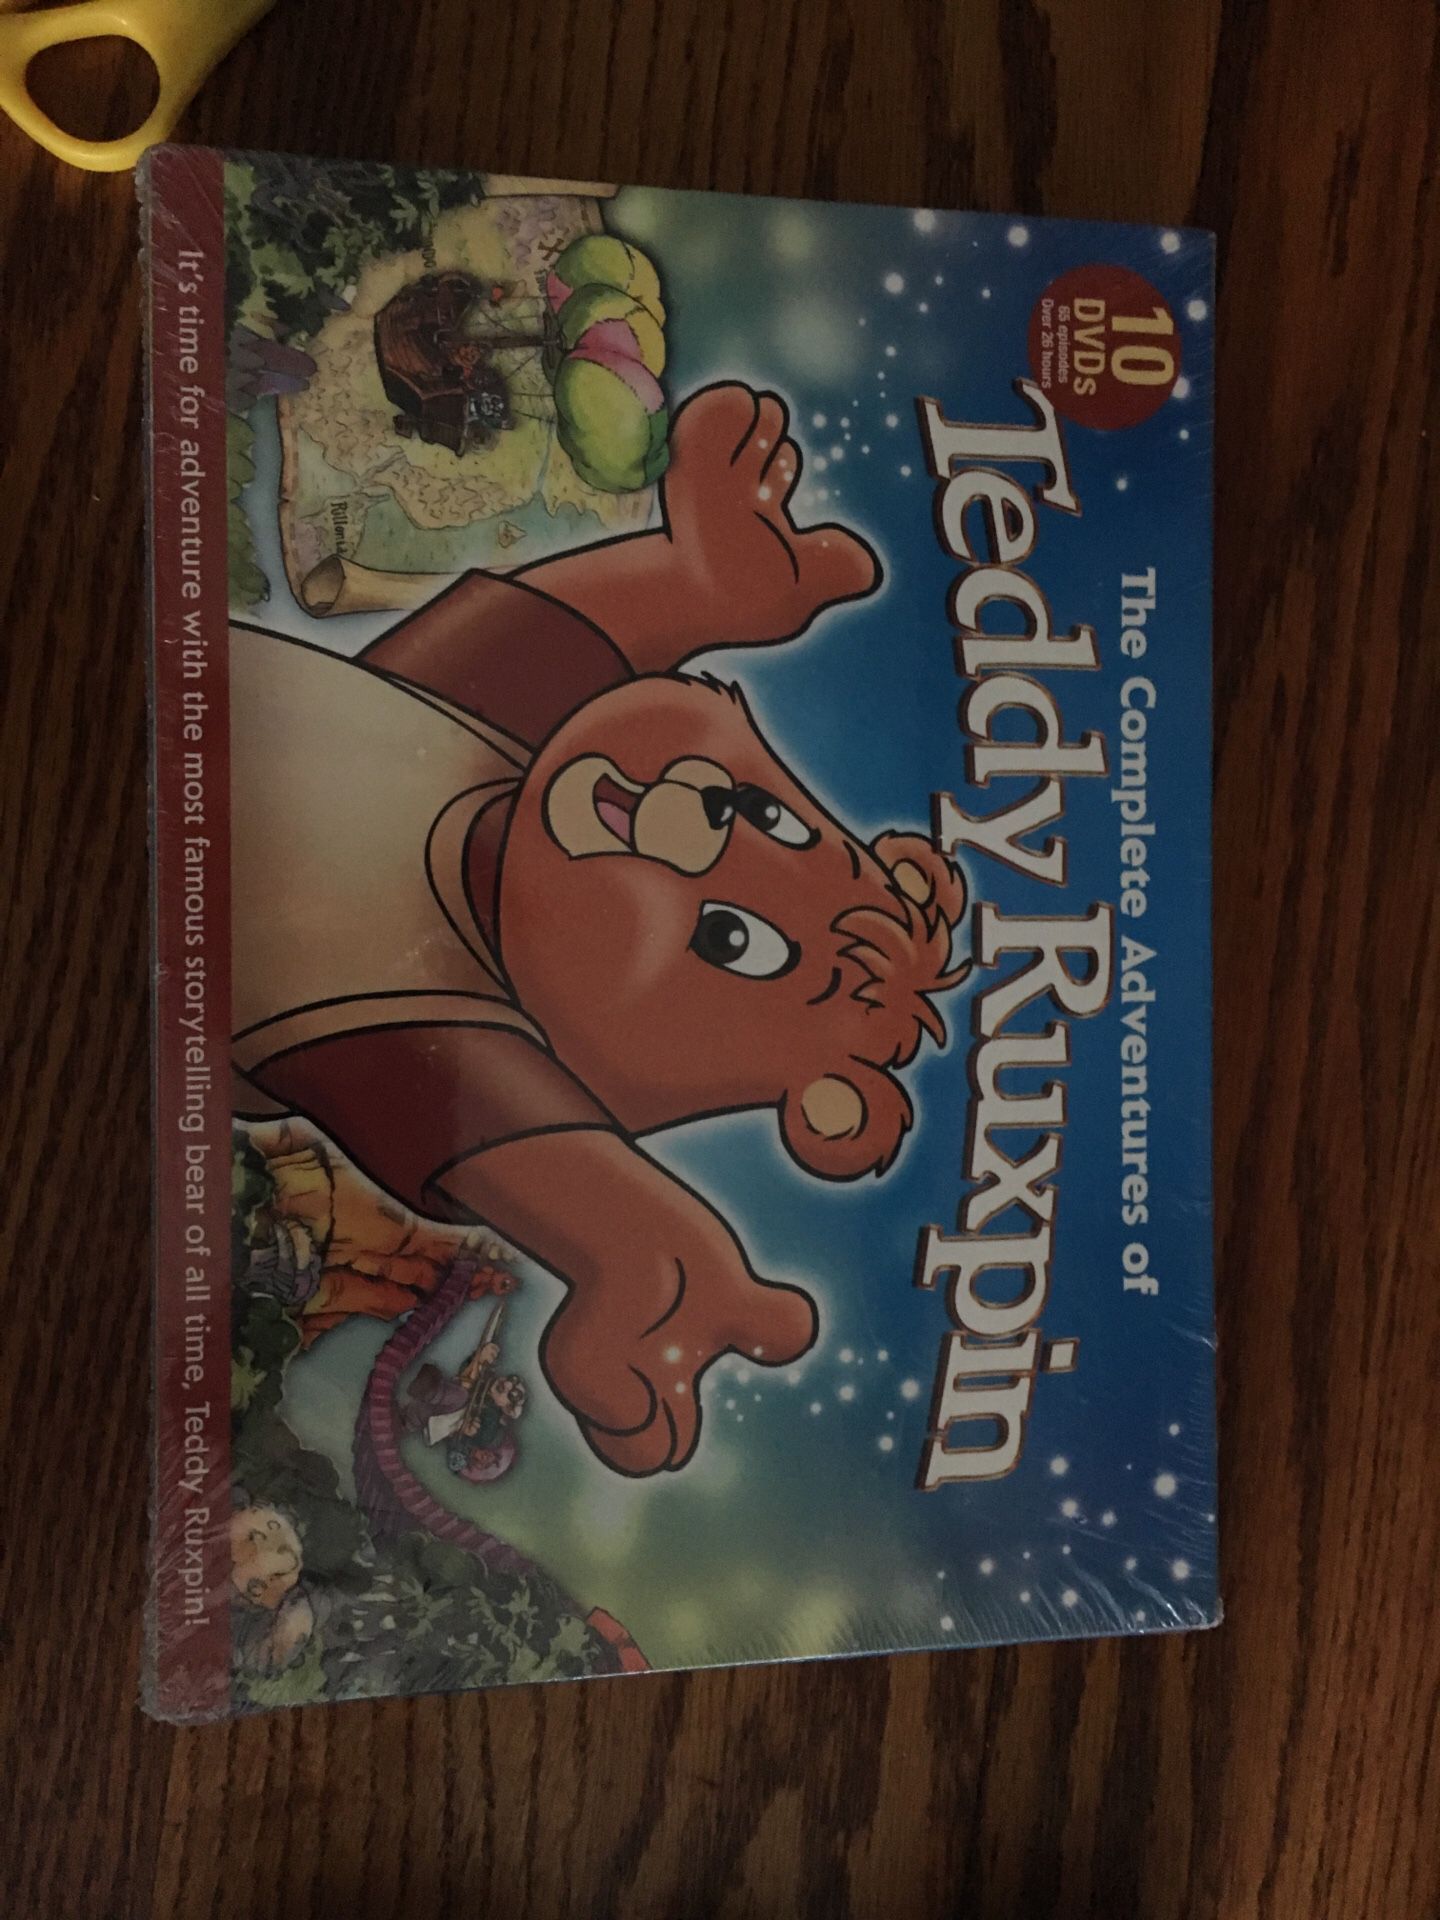 Unopened brand new 10 DVDs 65 episodes over 26 hours the complete adventure of Teddy Ruxpin.